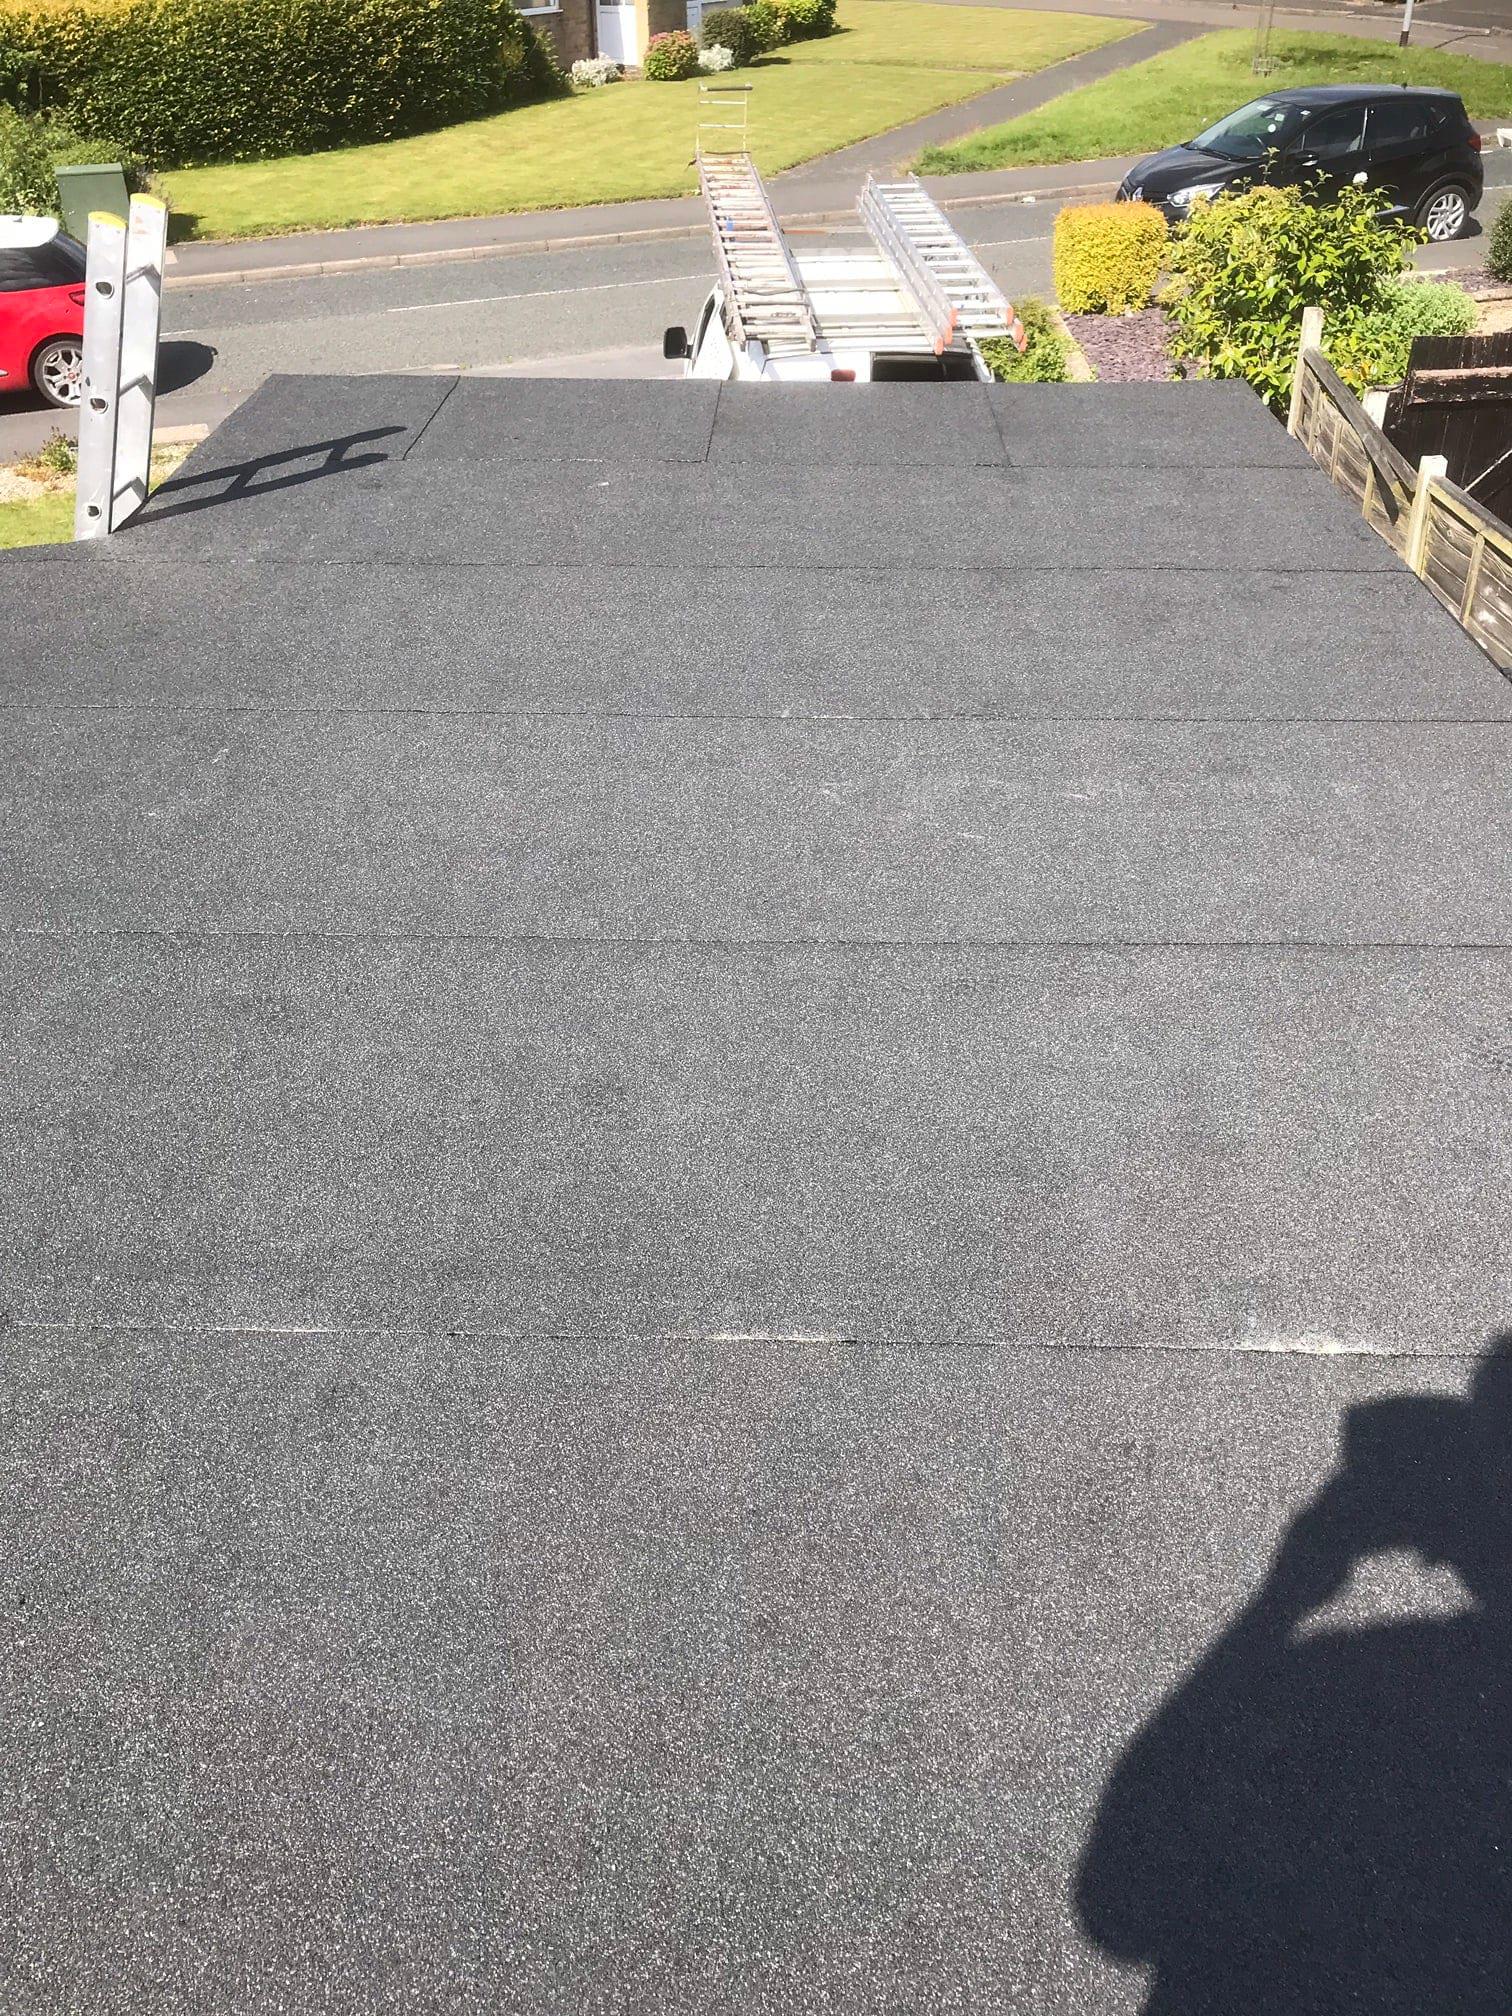 R&R Expert Roofing Coalville 01162 984667